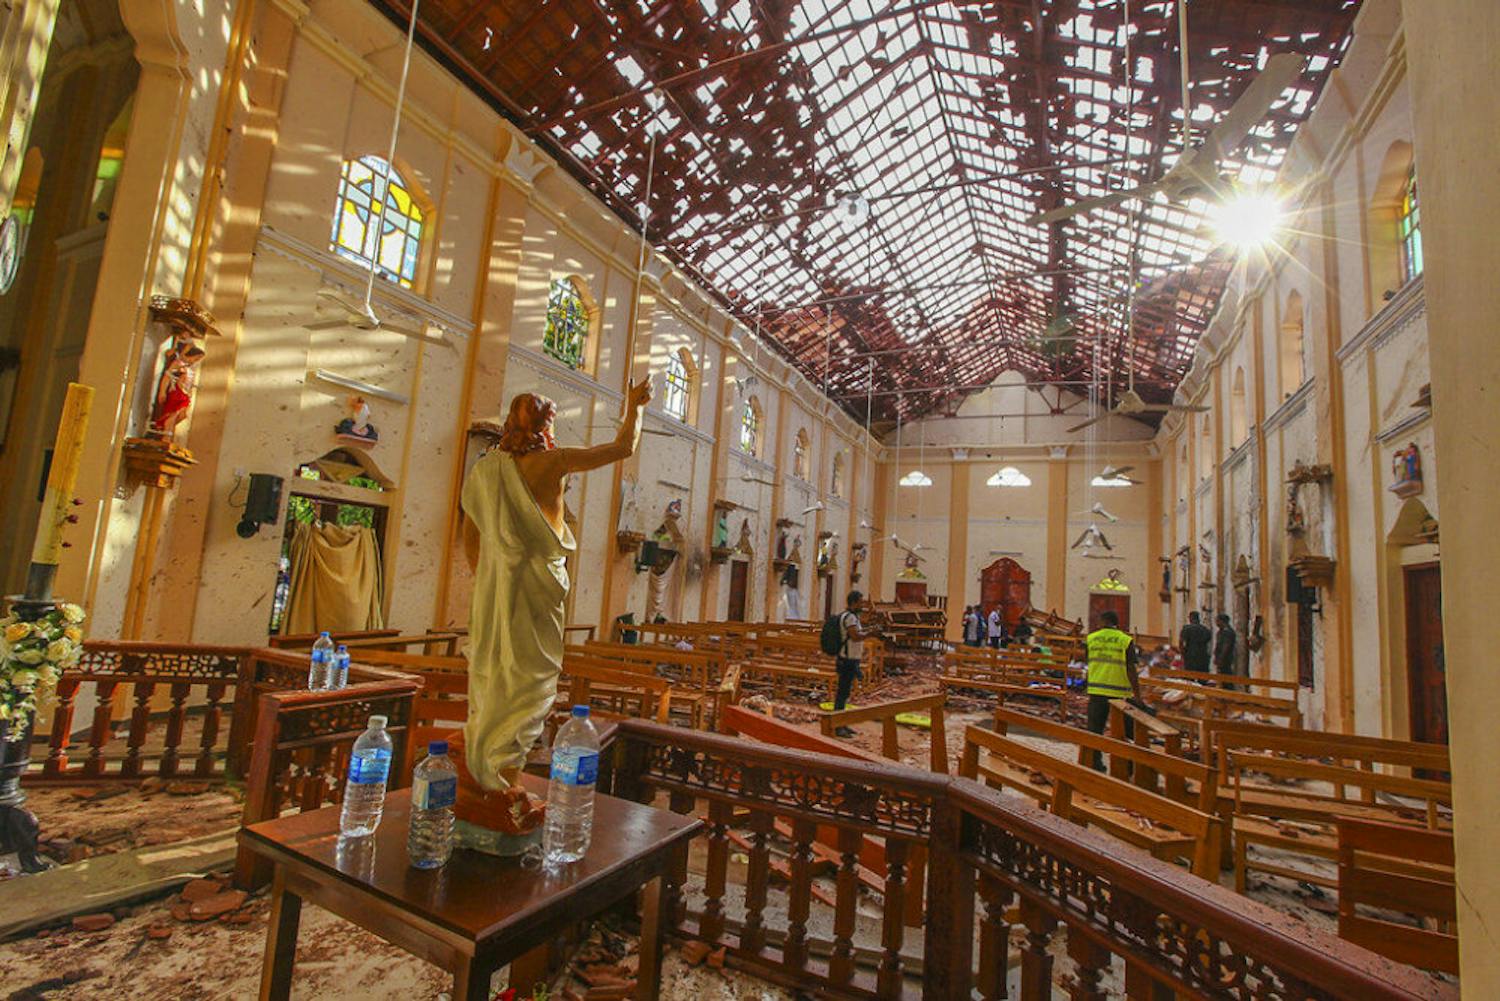 A view of St. Sebastian's Church damaged in blast in Negombo, north of Colombo, Sri Lanka, Sunday, April 21, 2019. More than hundred were killed and hundreds more hospitalized with injuries from eight blasts that rocked churches and hotels in and just outside of Sri Lanka's capital on Easter Sunday, officials said, the worst violence to hit the South Asian country since its civil war ended a decade ago. (AP Photo/Chamila Karunarathne)